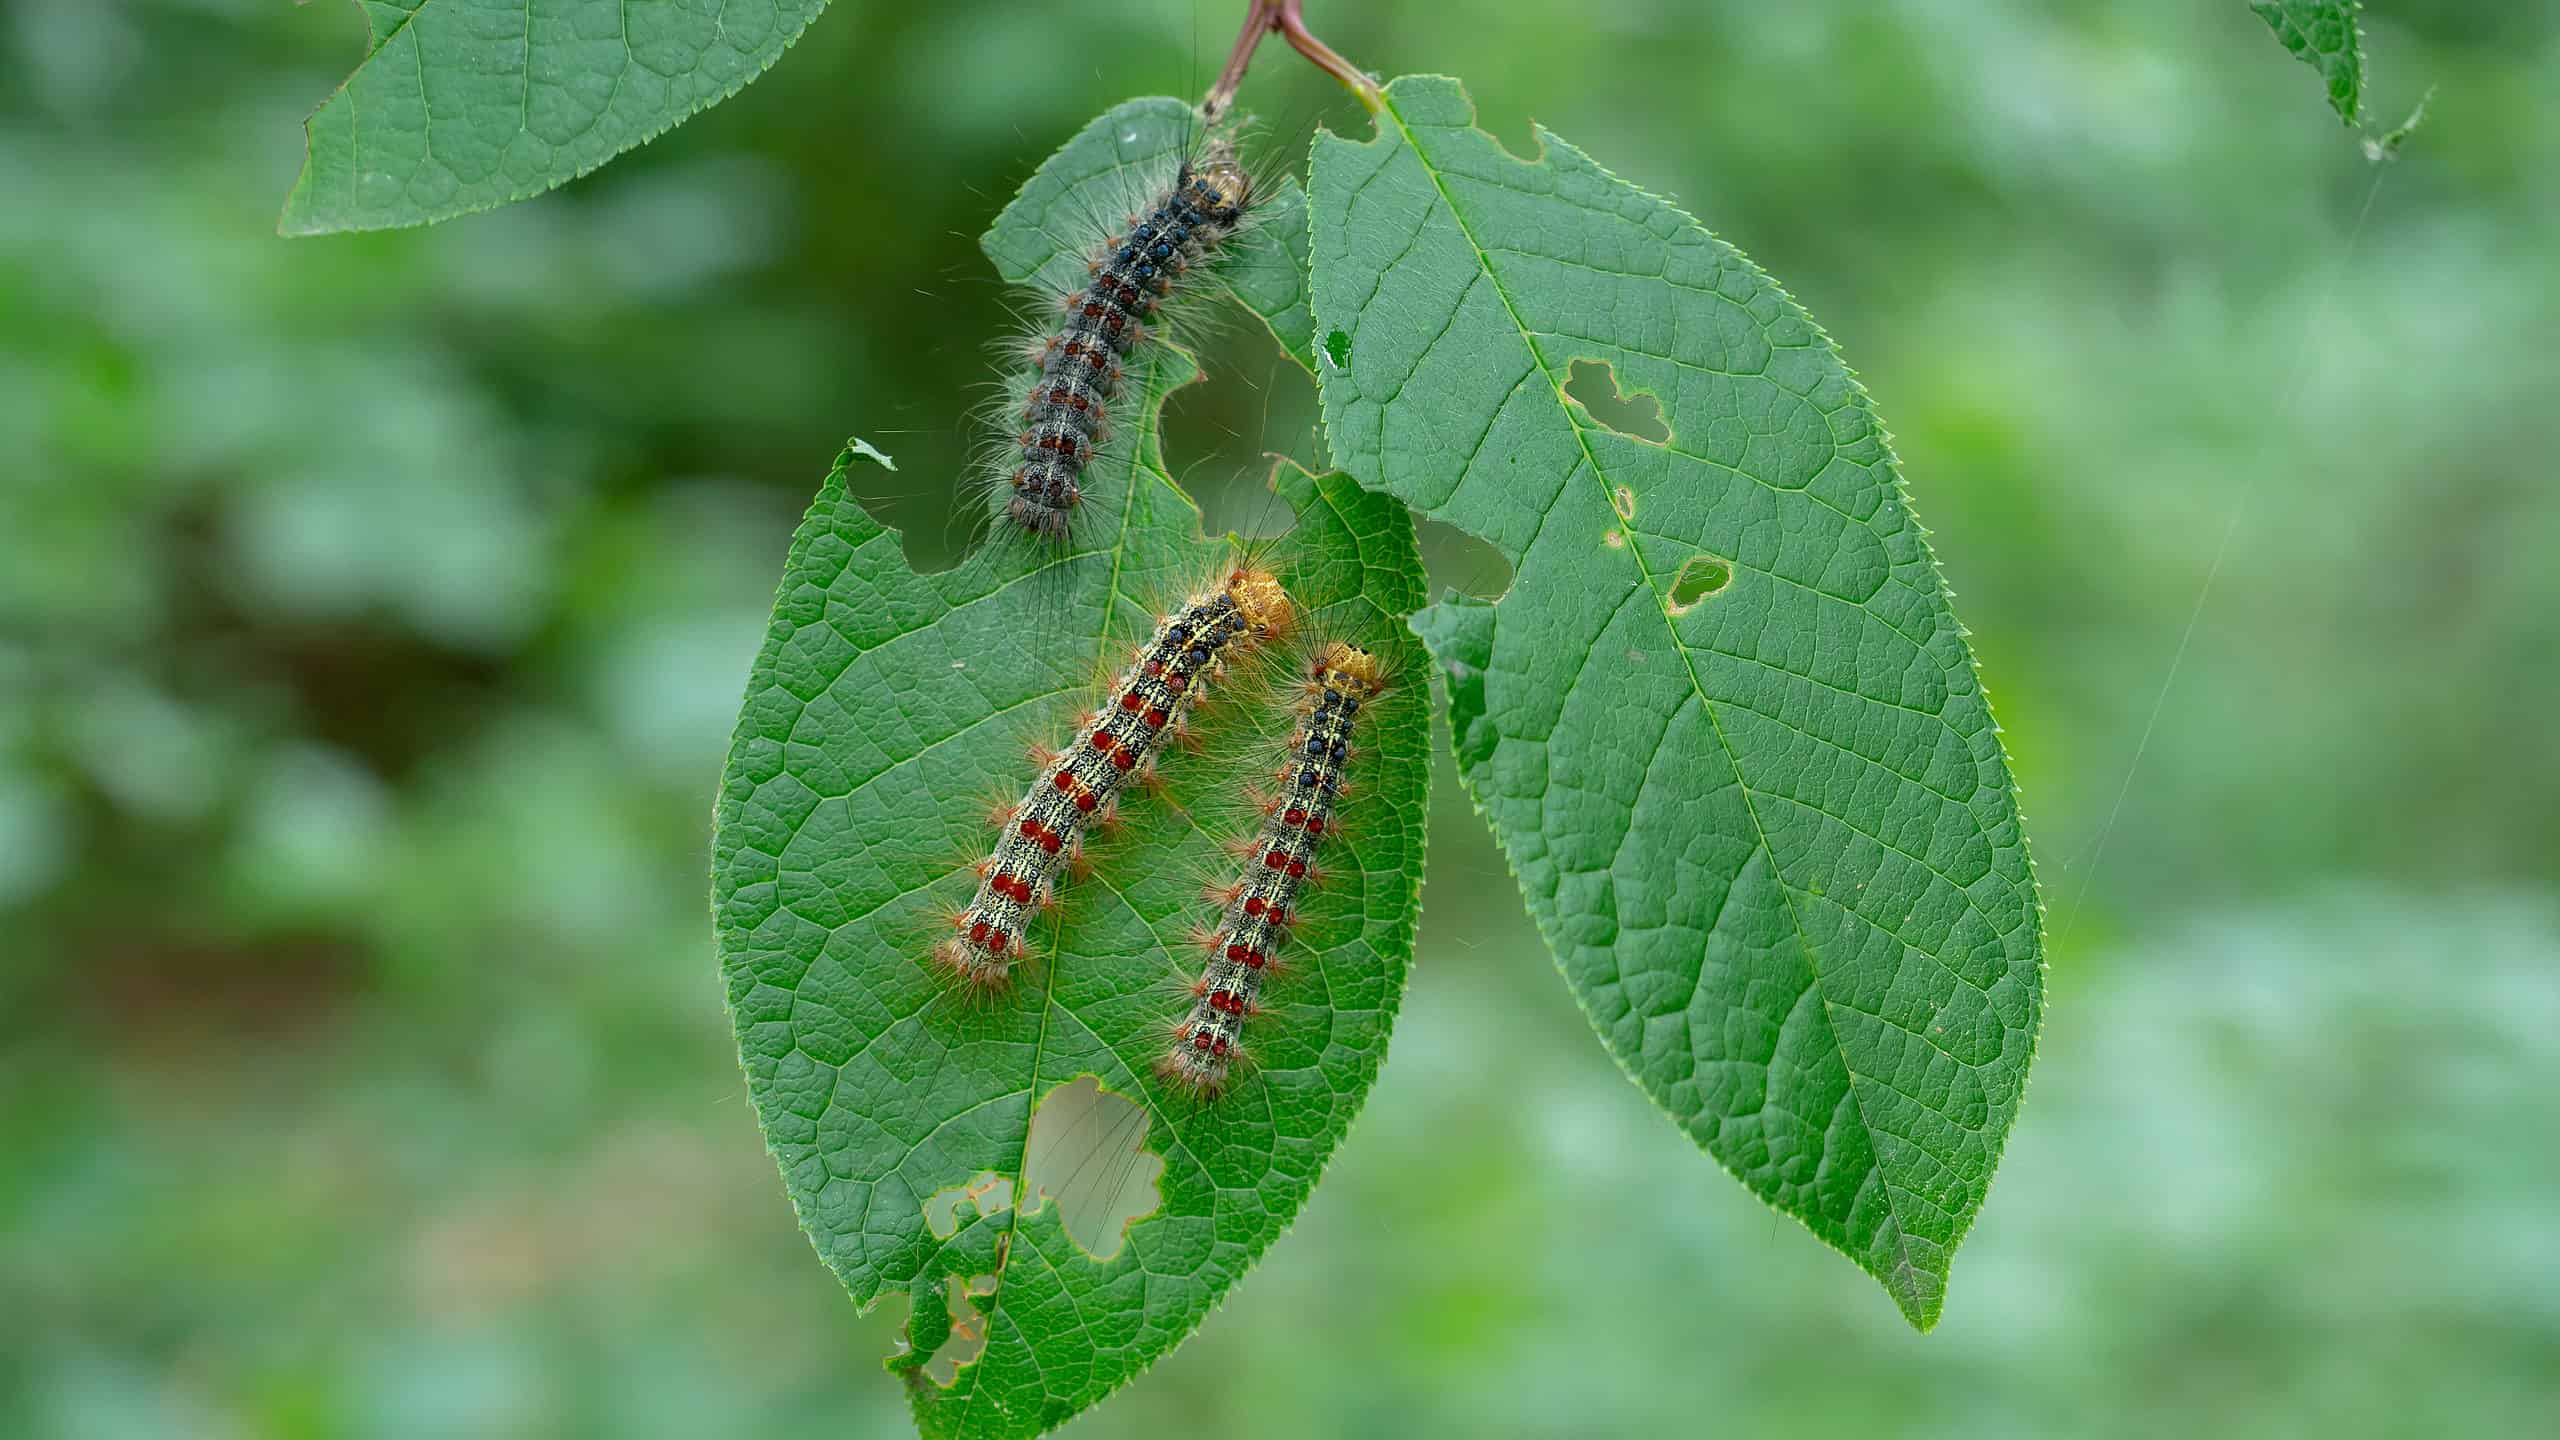 3 gypsy moth caterpillars are visible center frame on a oval shaped green leaf. A darker caterpillar is seen at the top of the leaf and to somewhat lighter caterpillars are seen below that. The leaf has holes in it as if they have been eating it. There is another similarly sized green leave with holes in it adjacent to the green leaf the caterpillars are on. The background is out of focus greenery.